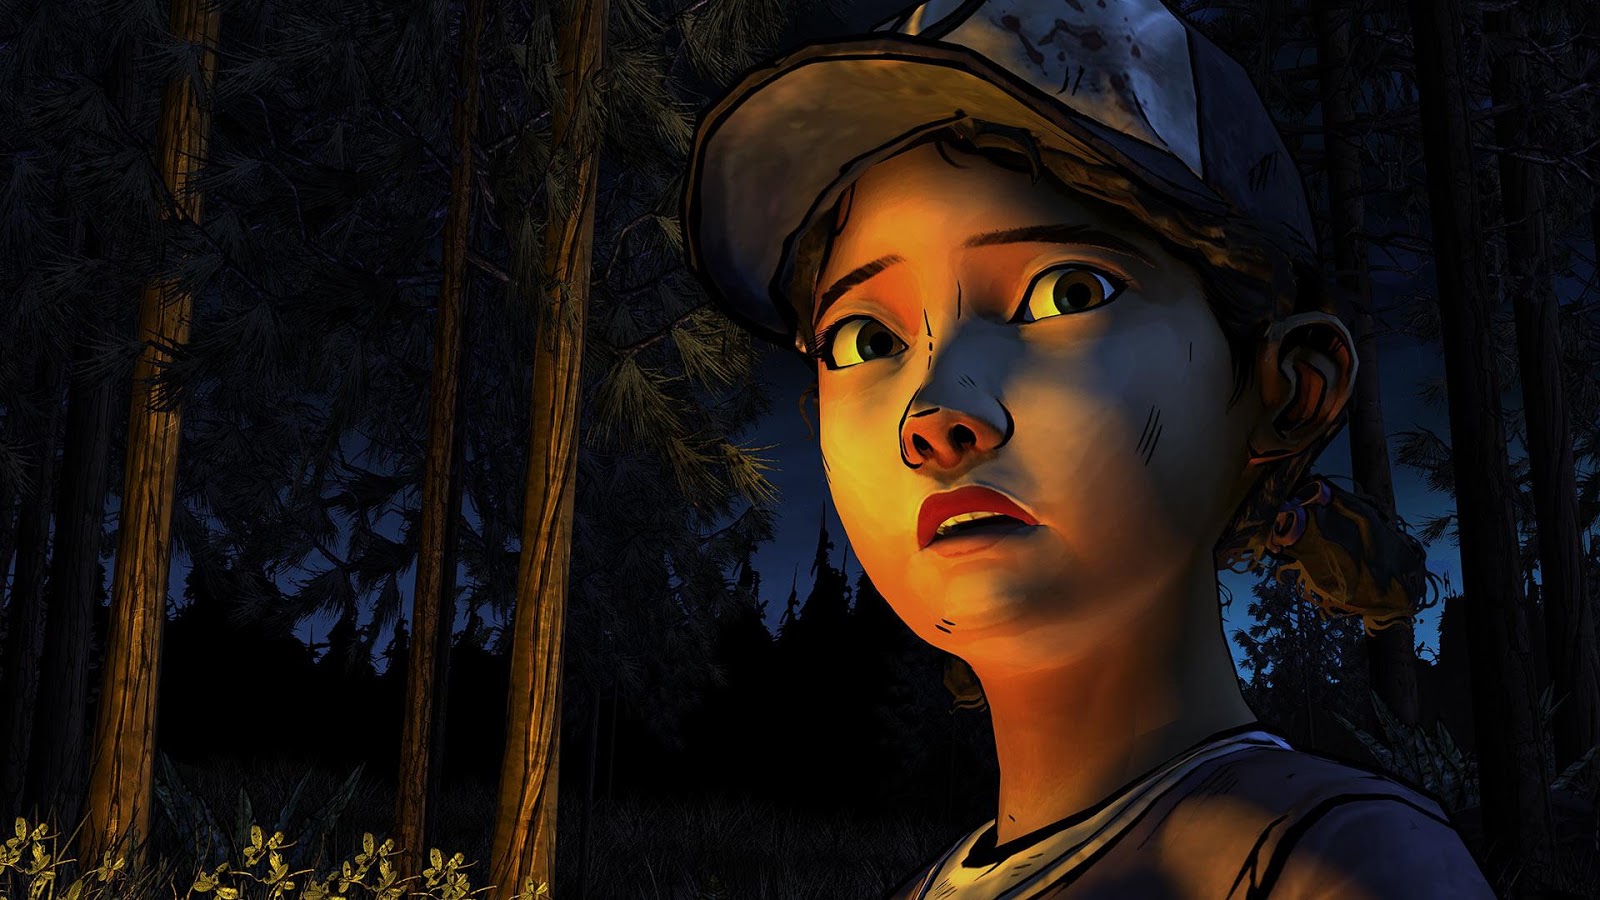 Play the walking dead game online free